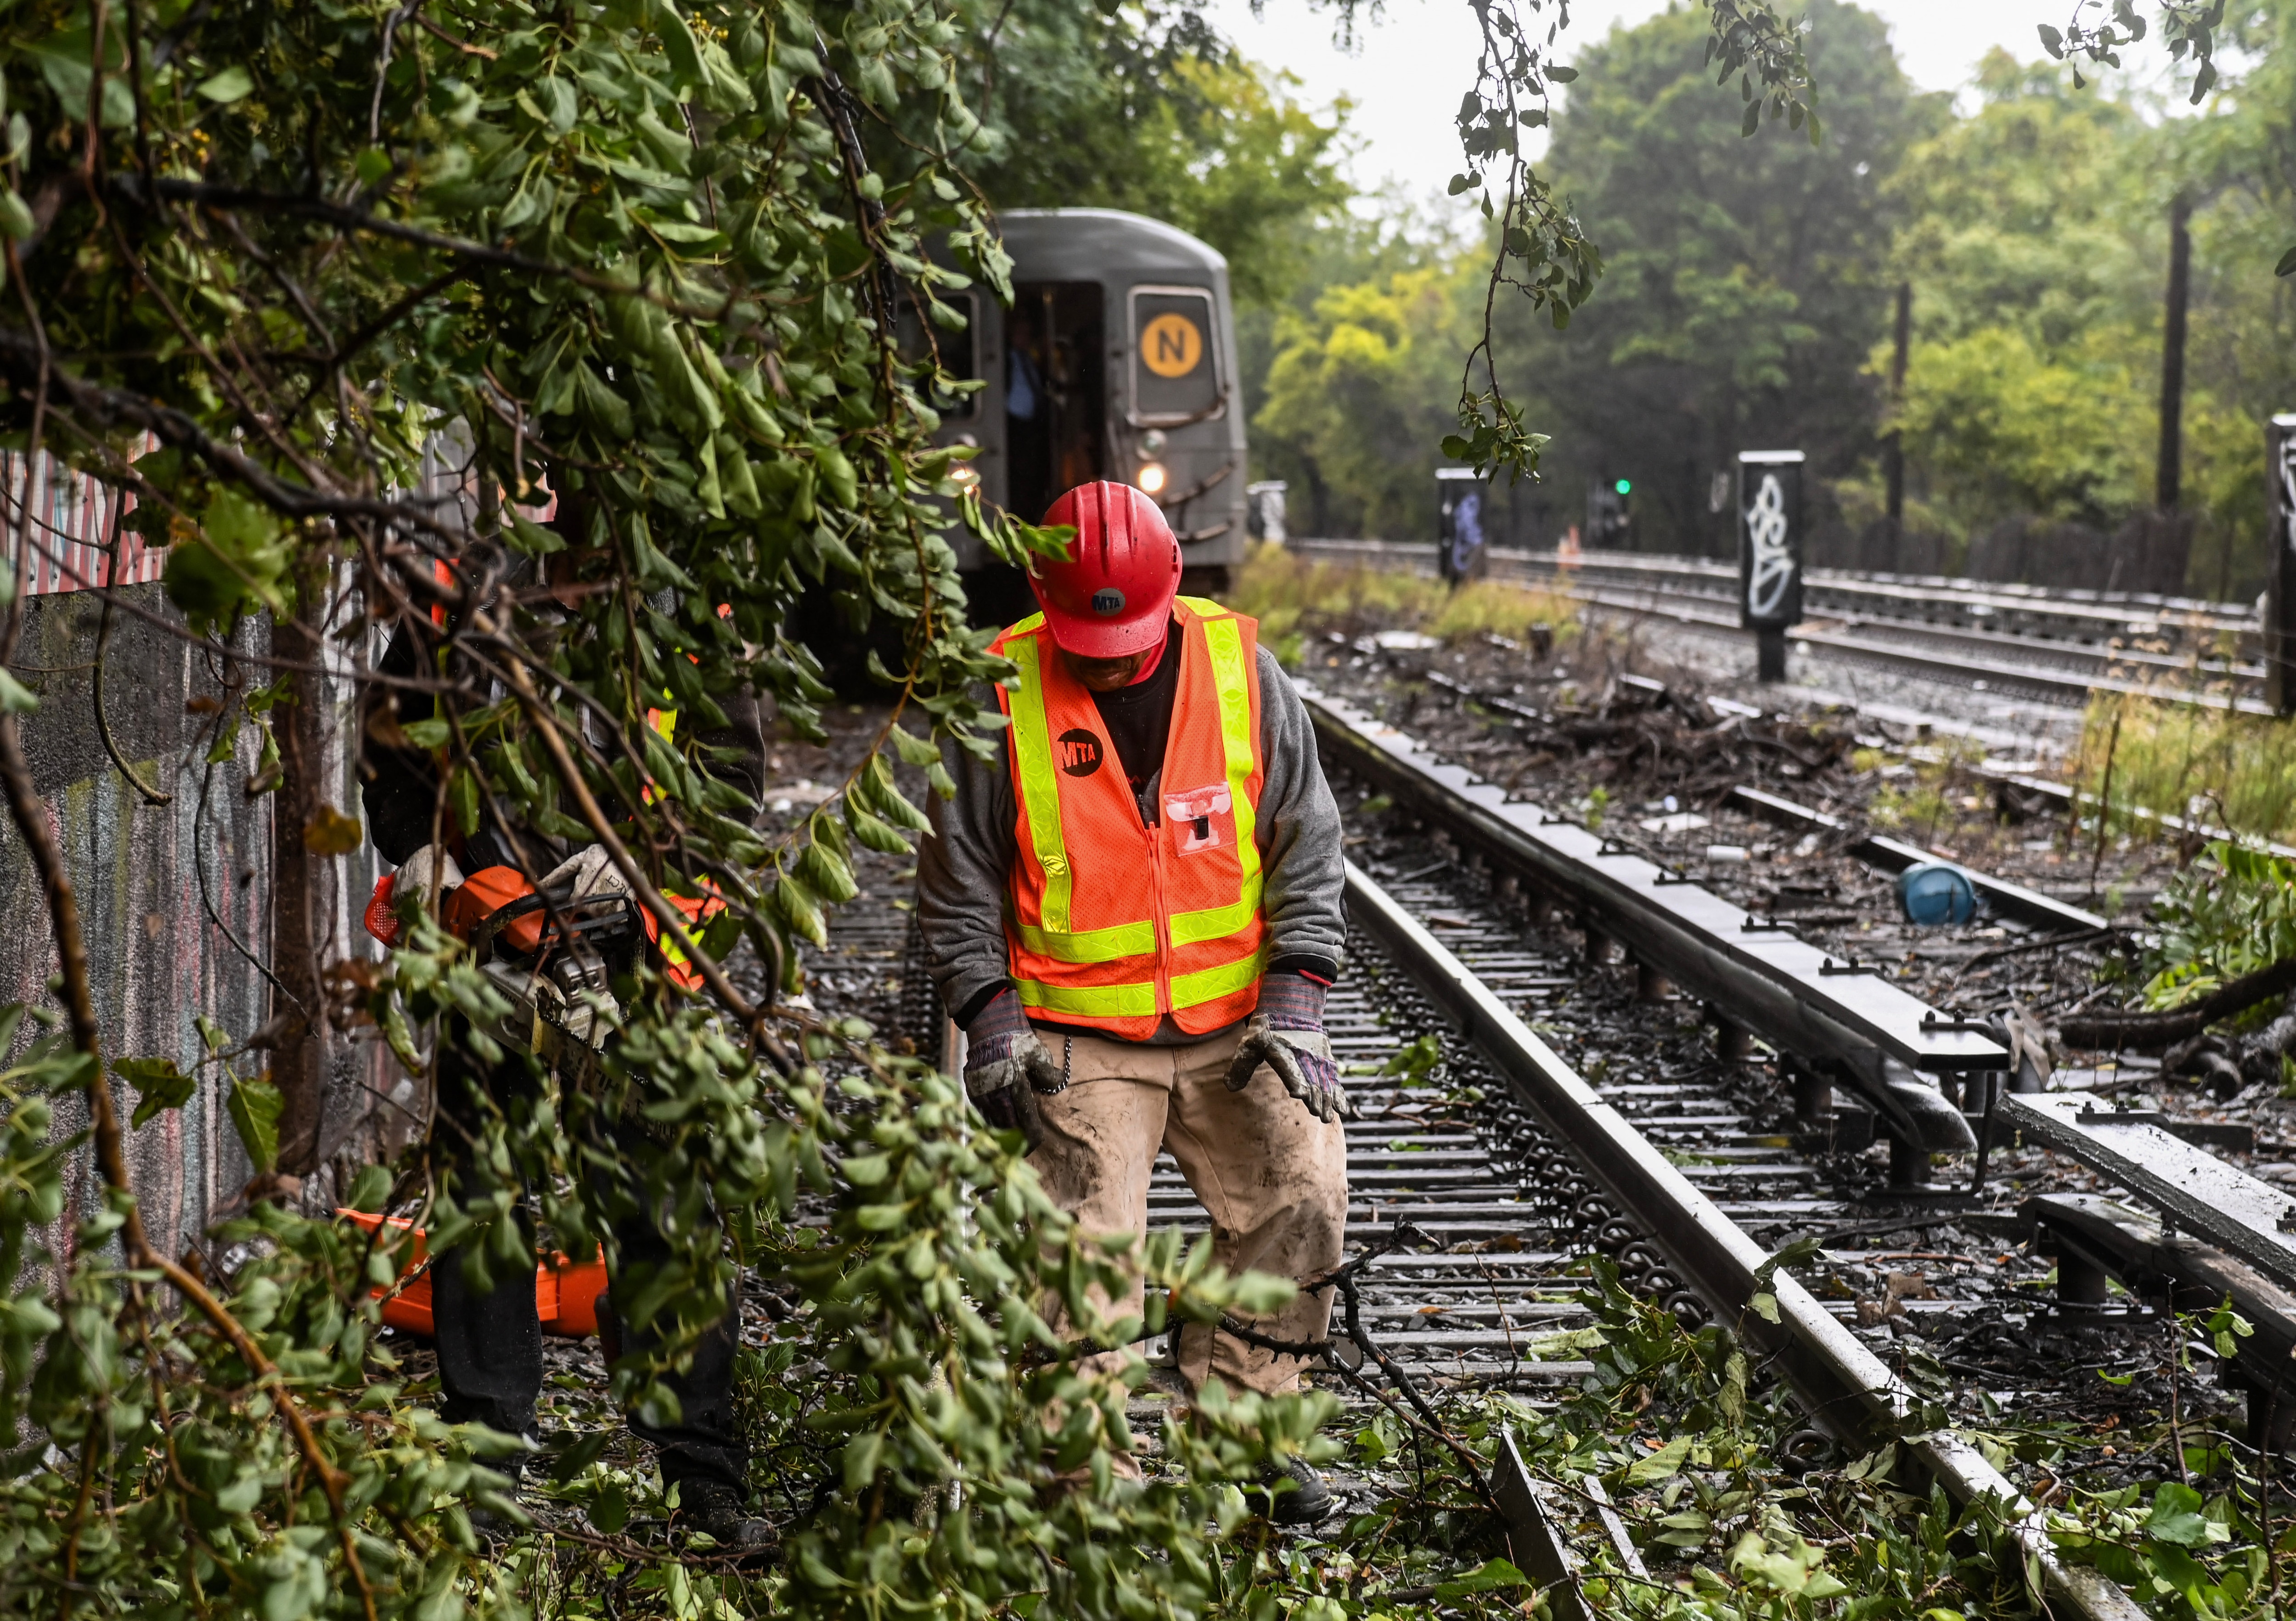 PHOTOS: MTA Crews Work to Remove Fallen Tree from Tracks in Brooklyn